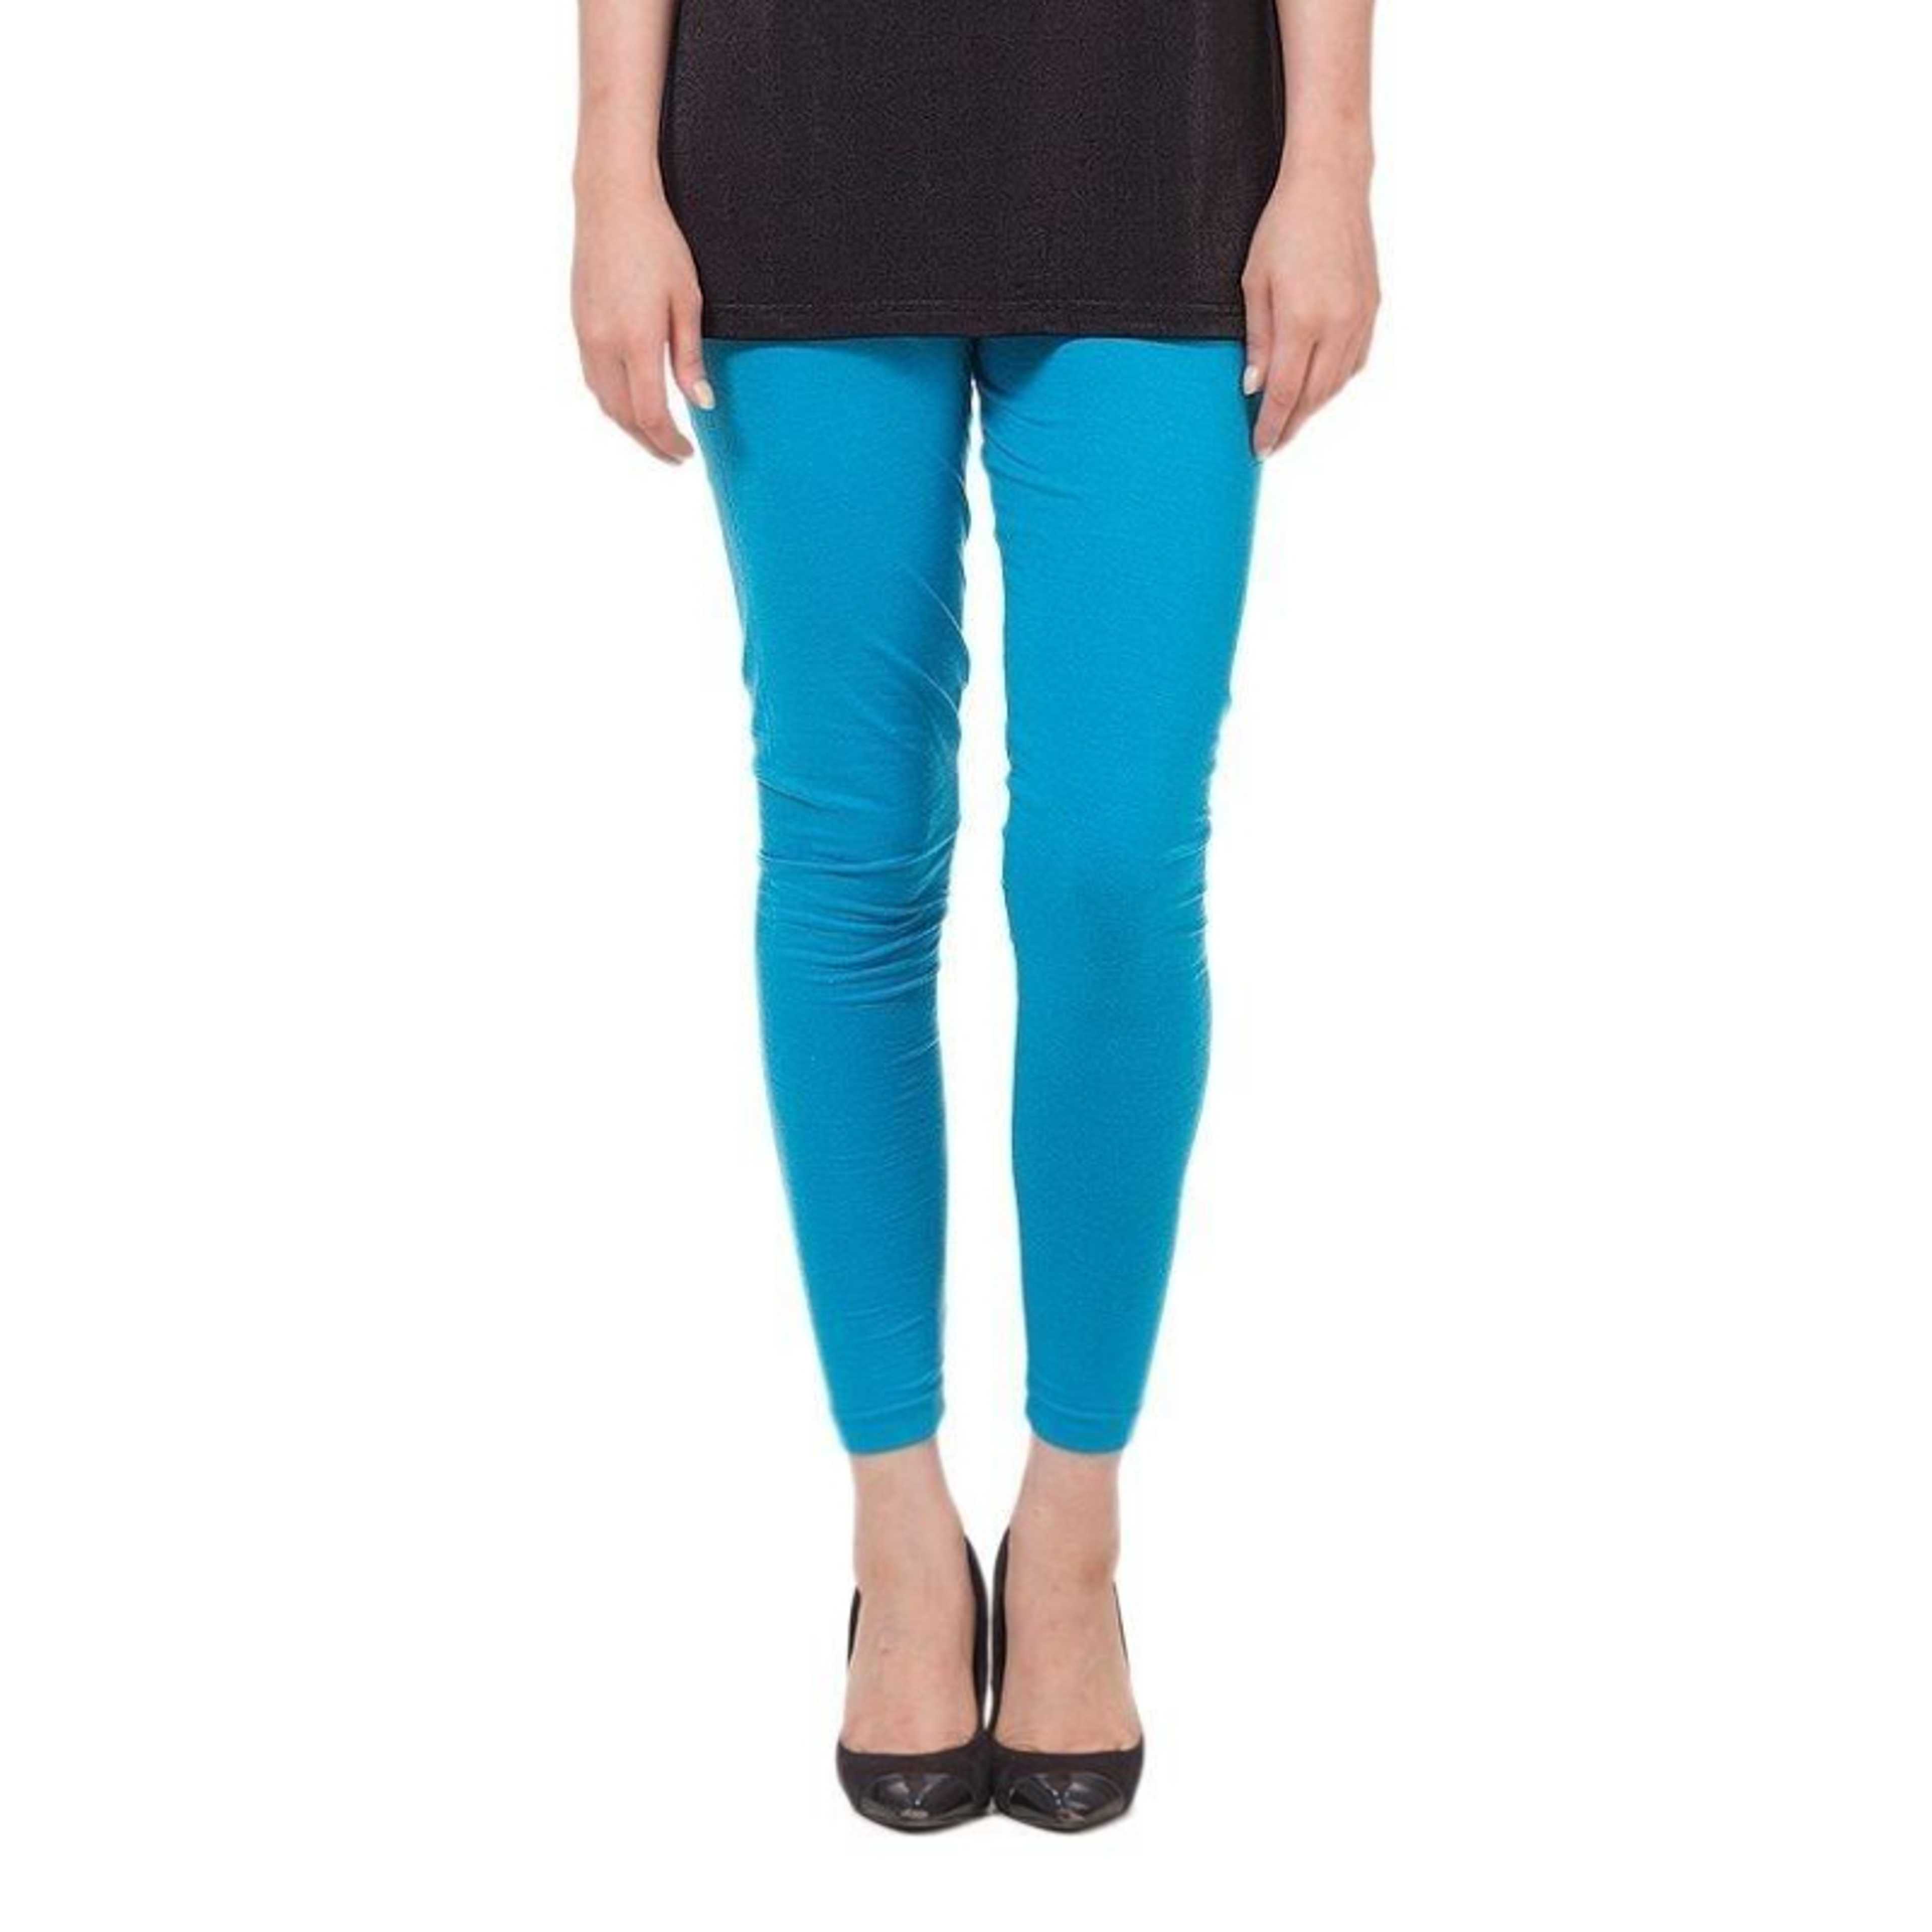 Blue Cotton Tights For Women (One Size)